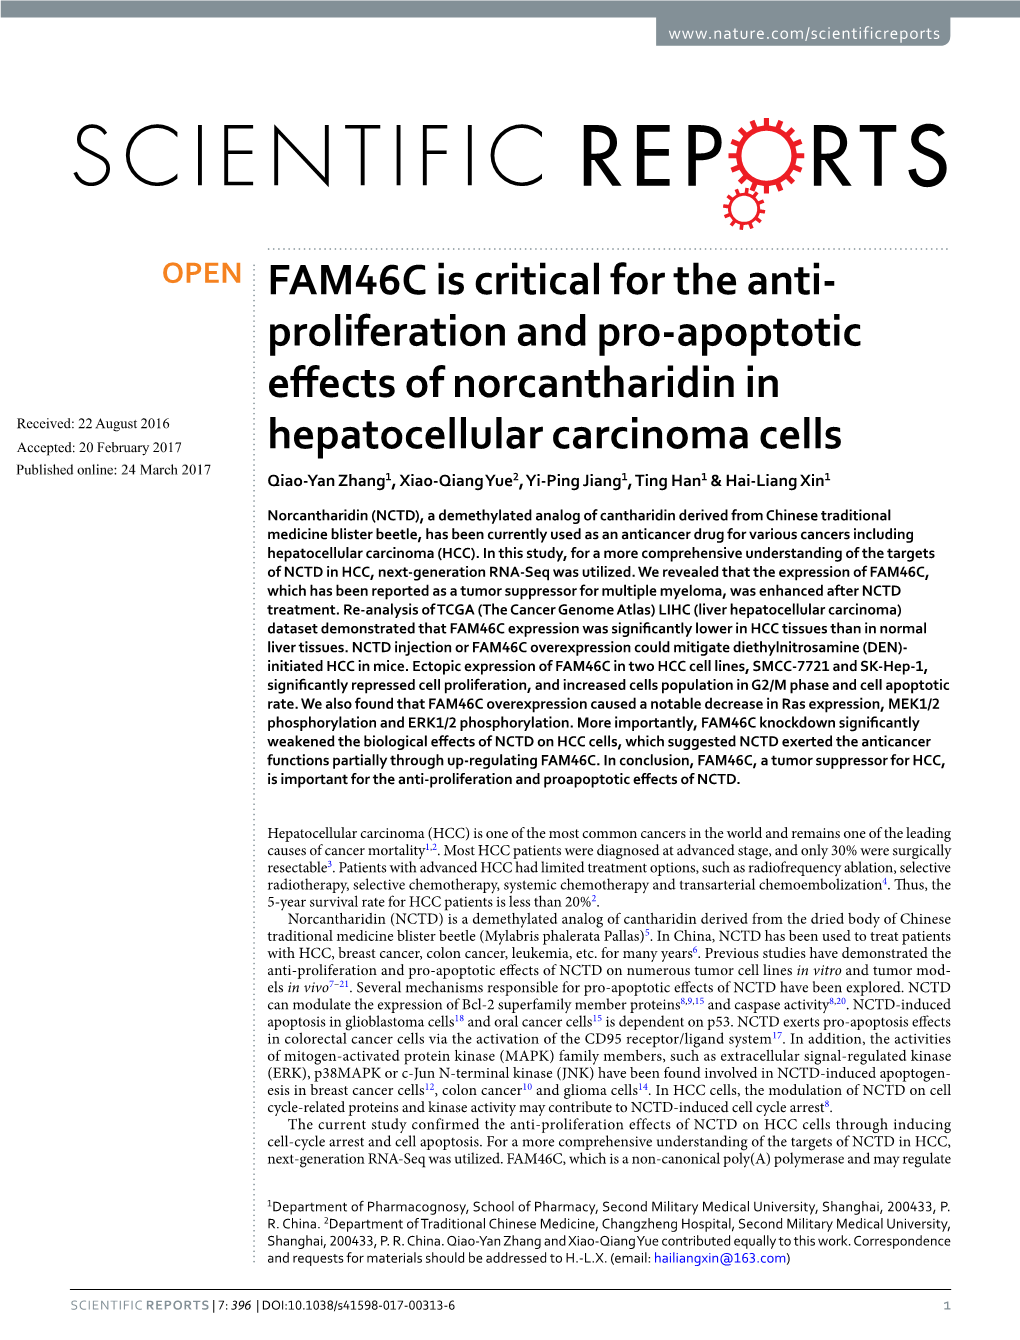 FAM46C Is Critical for the Anti-Proliferation and Pro-Apoptotic